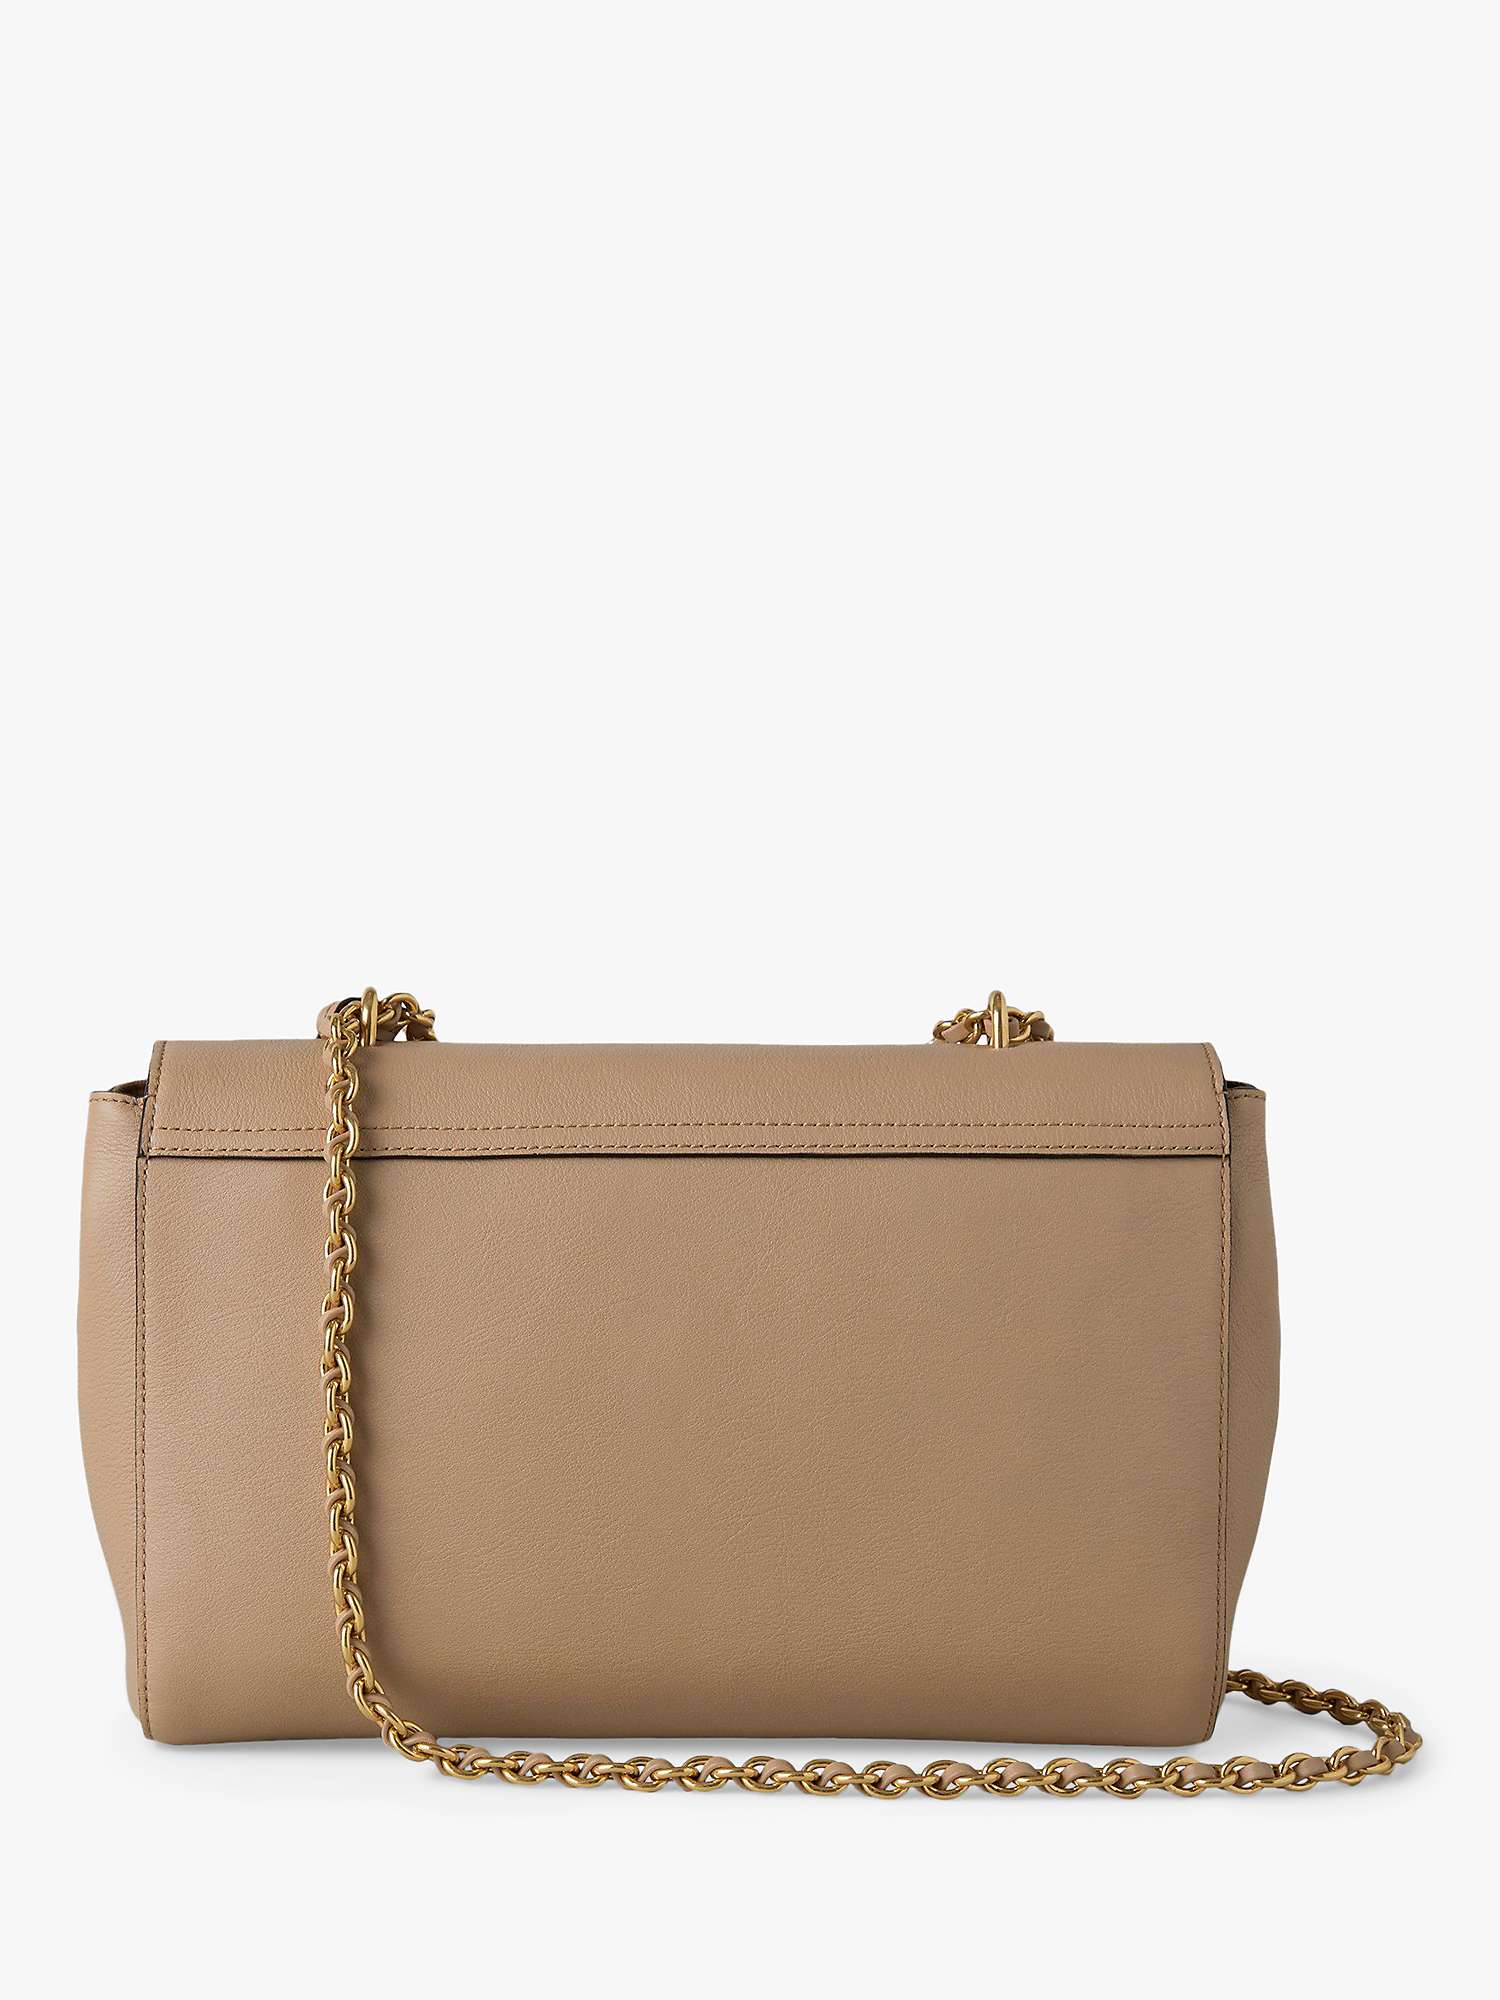 Mulberry Medium Lily Silky Calf Leather Shoulder Bag, Maple at